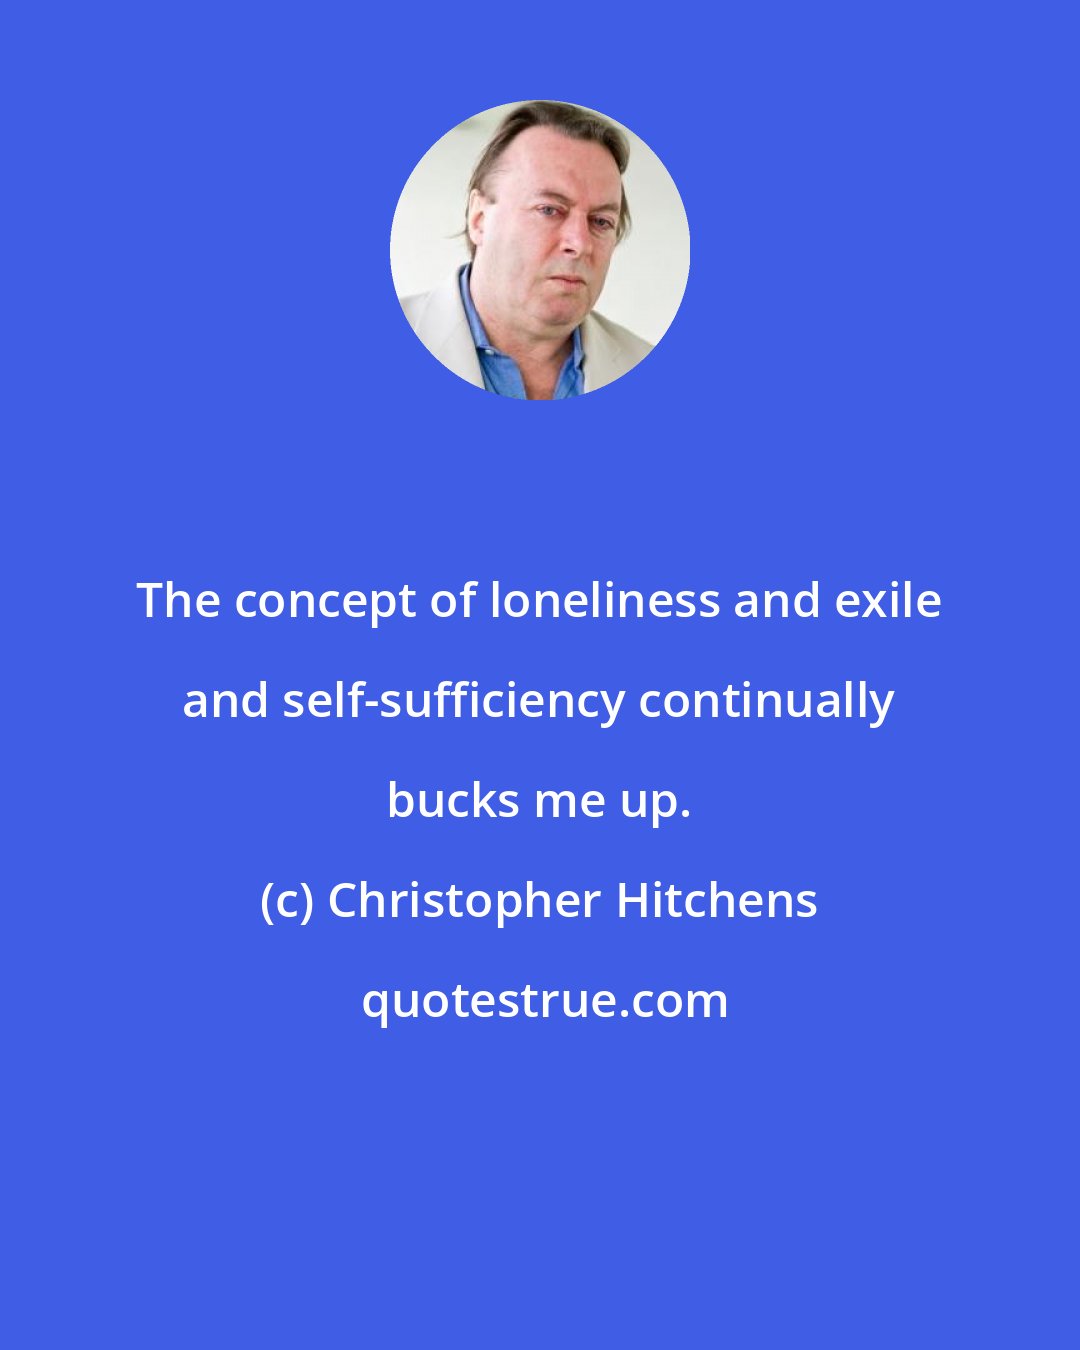 Christopher Hitchens: The concept of loneliness and exile and self-sufficiency continually bucks me up.